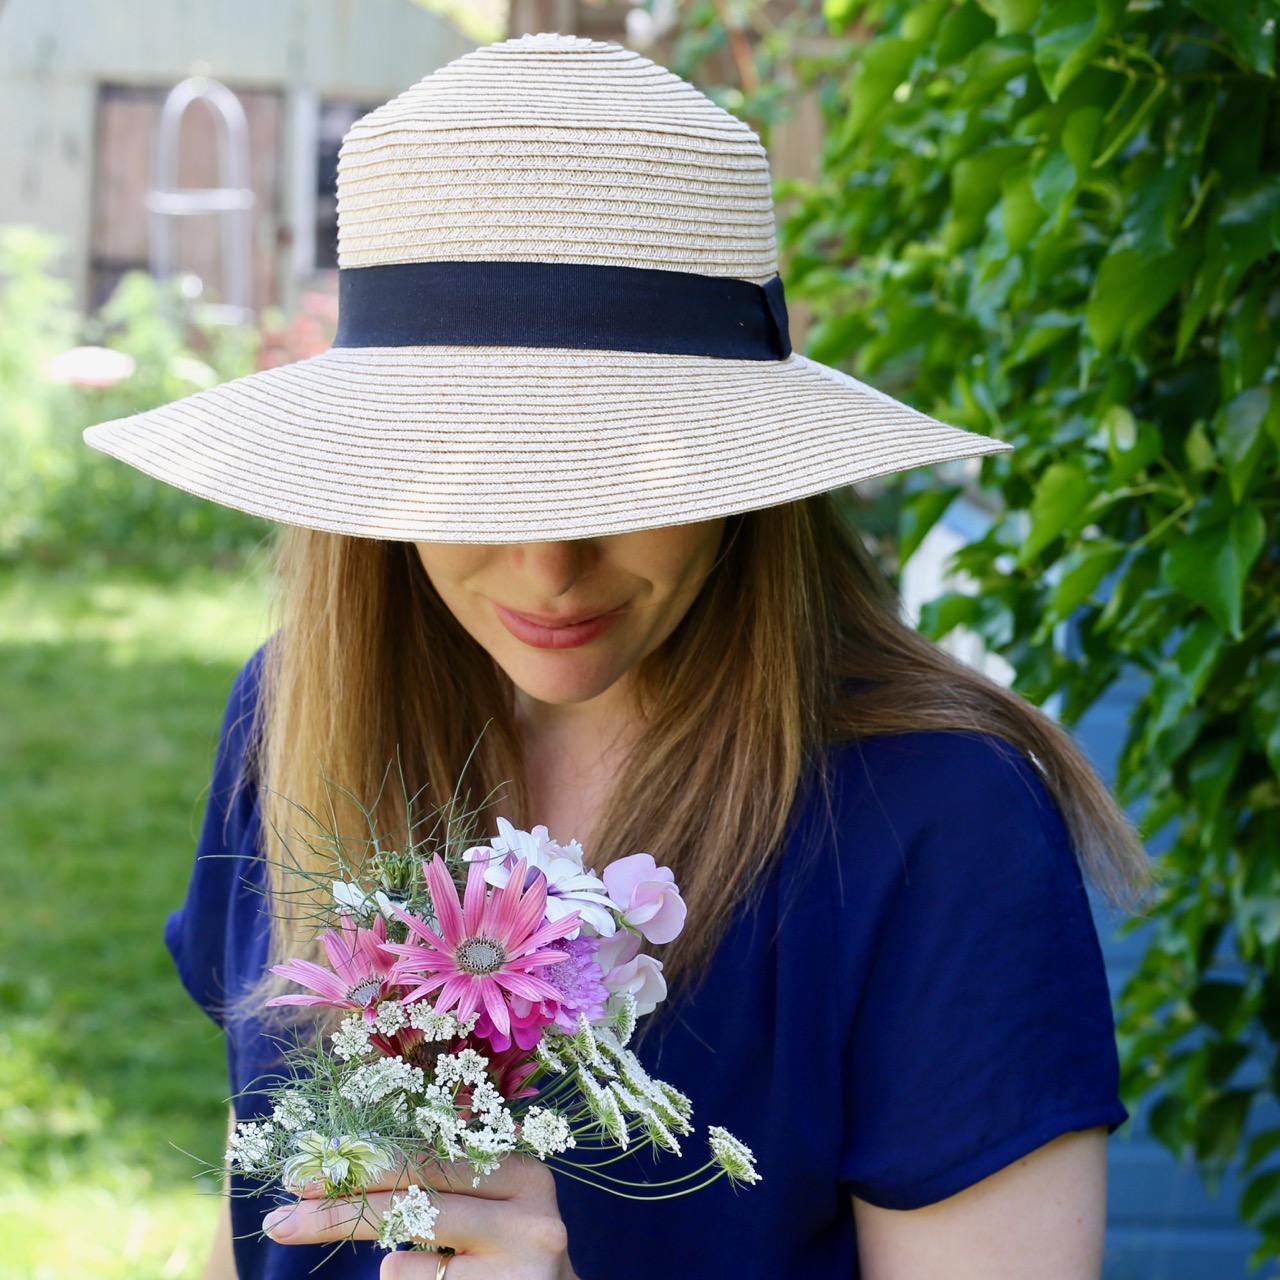 Sunhat and flowers